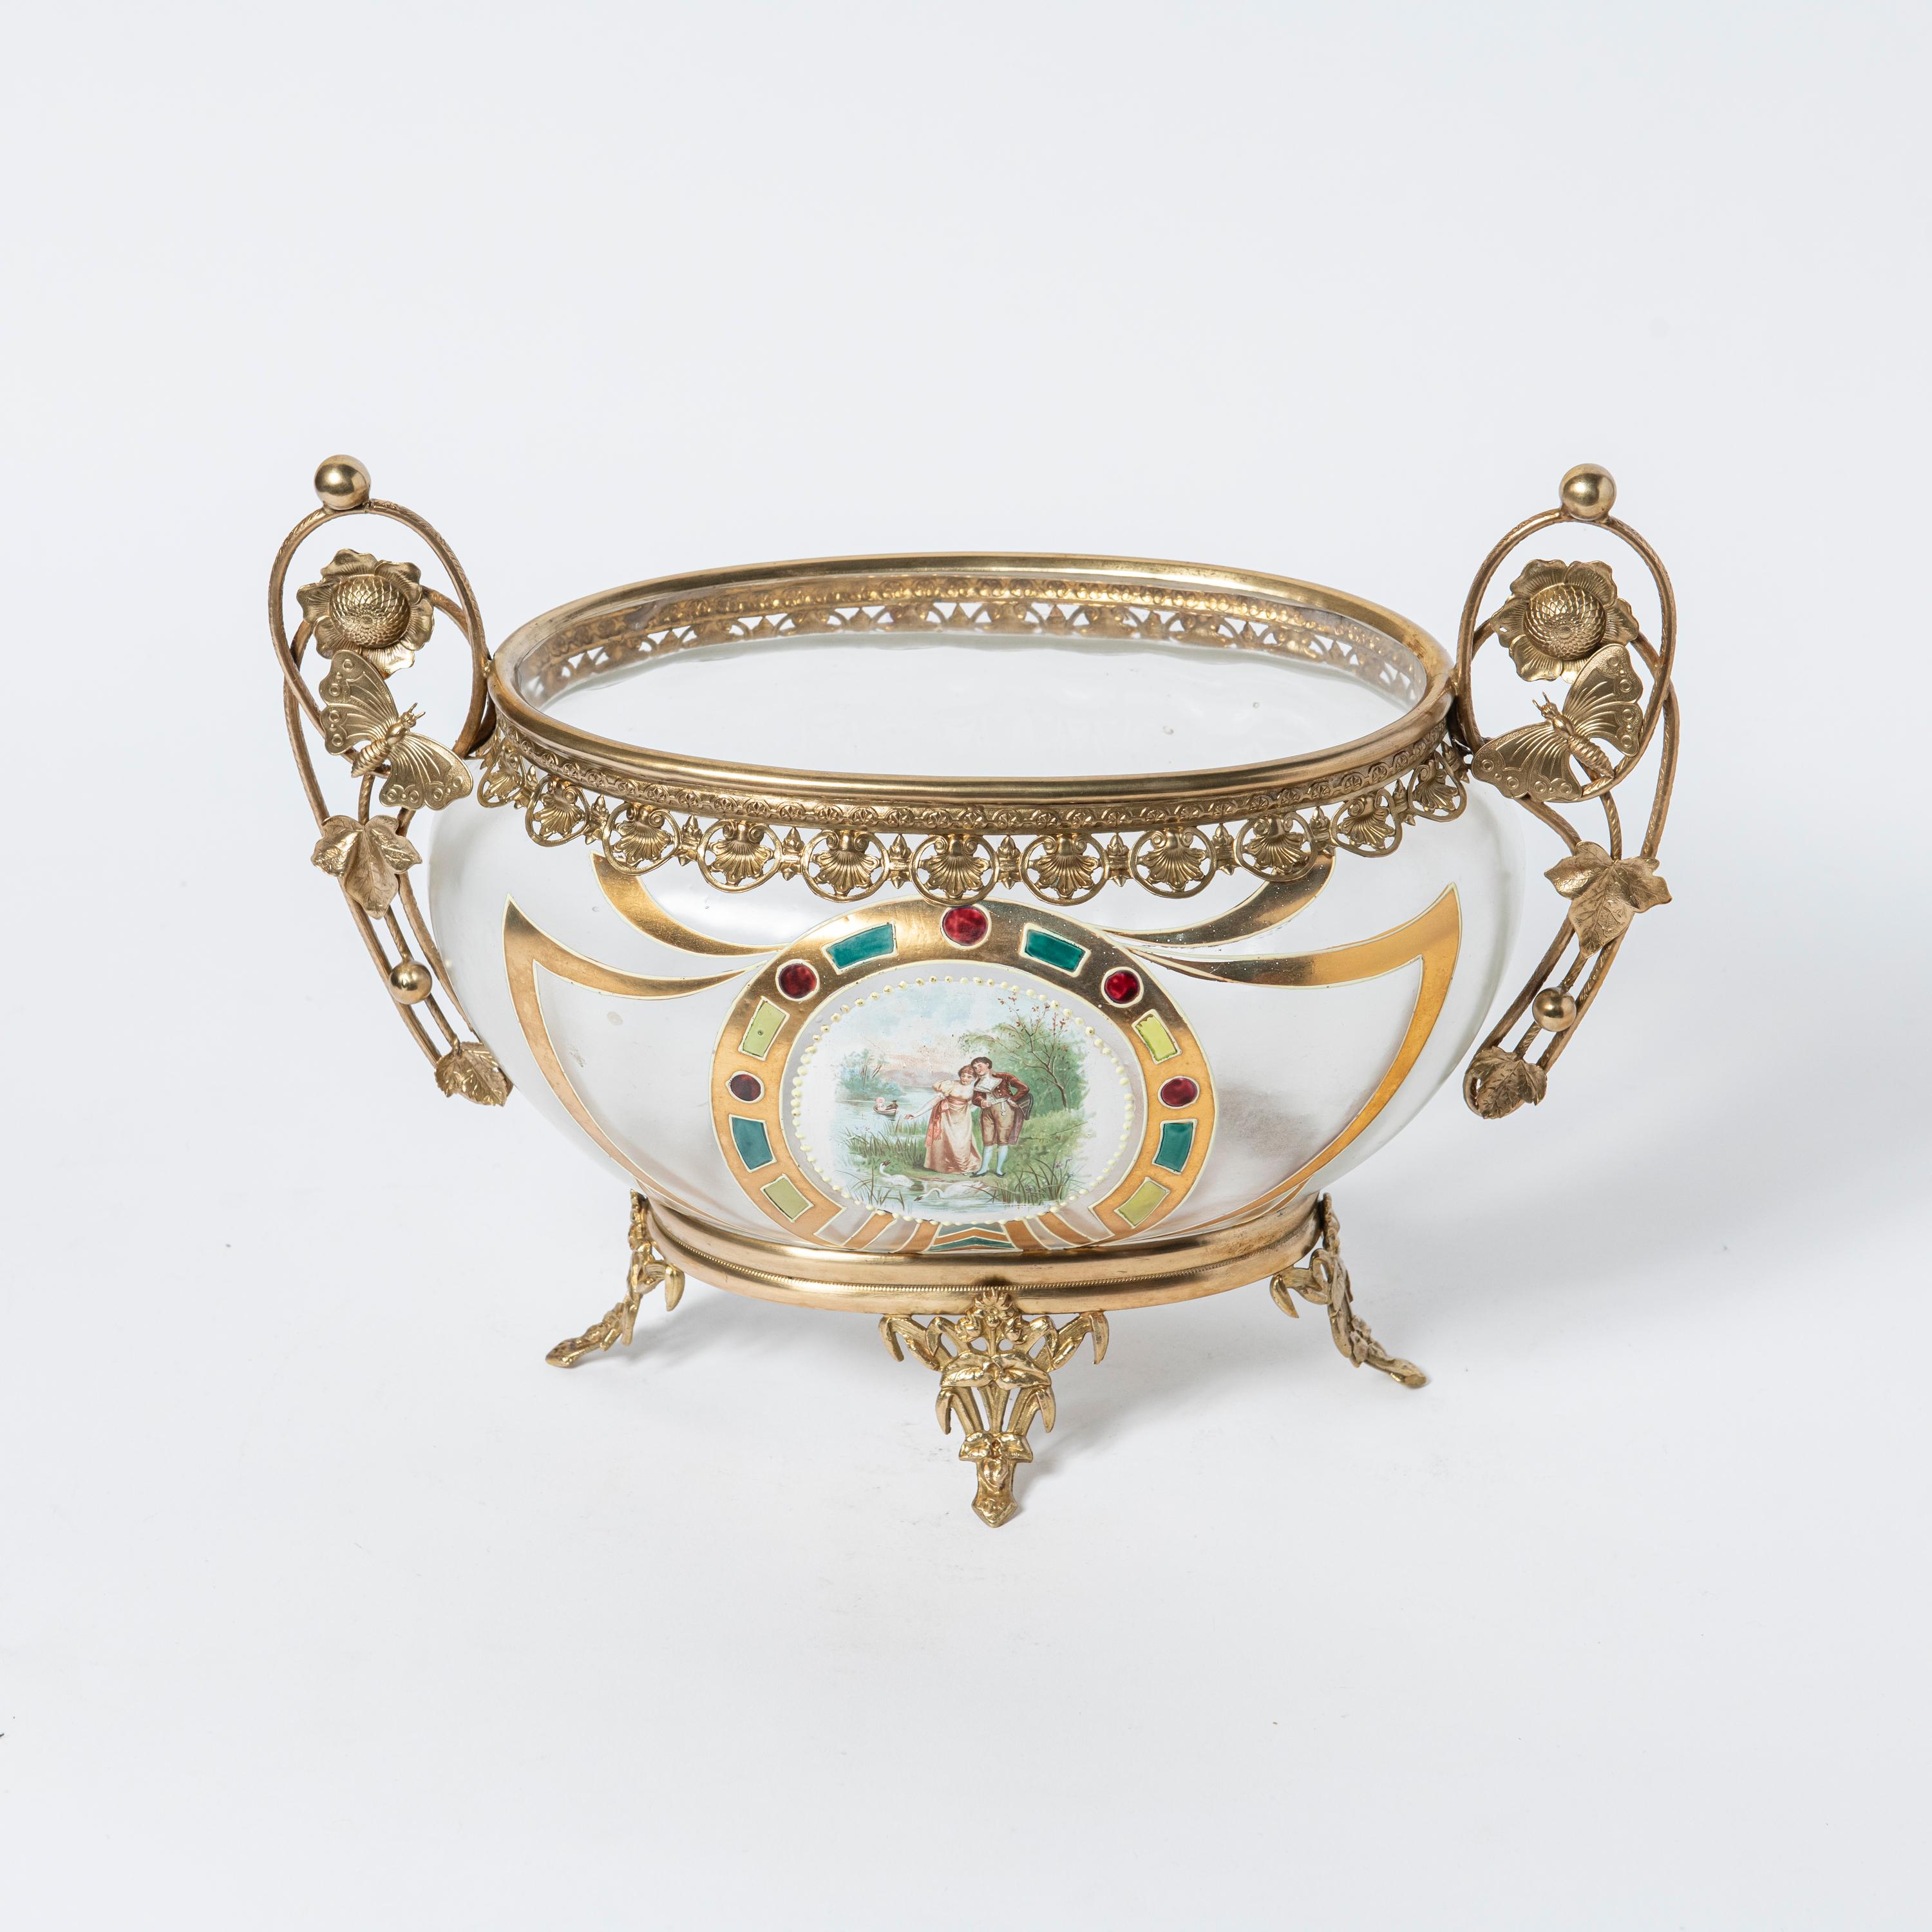 Painted opaline with bronze ornaments centerpiece. France, late 19th century.